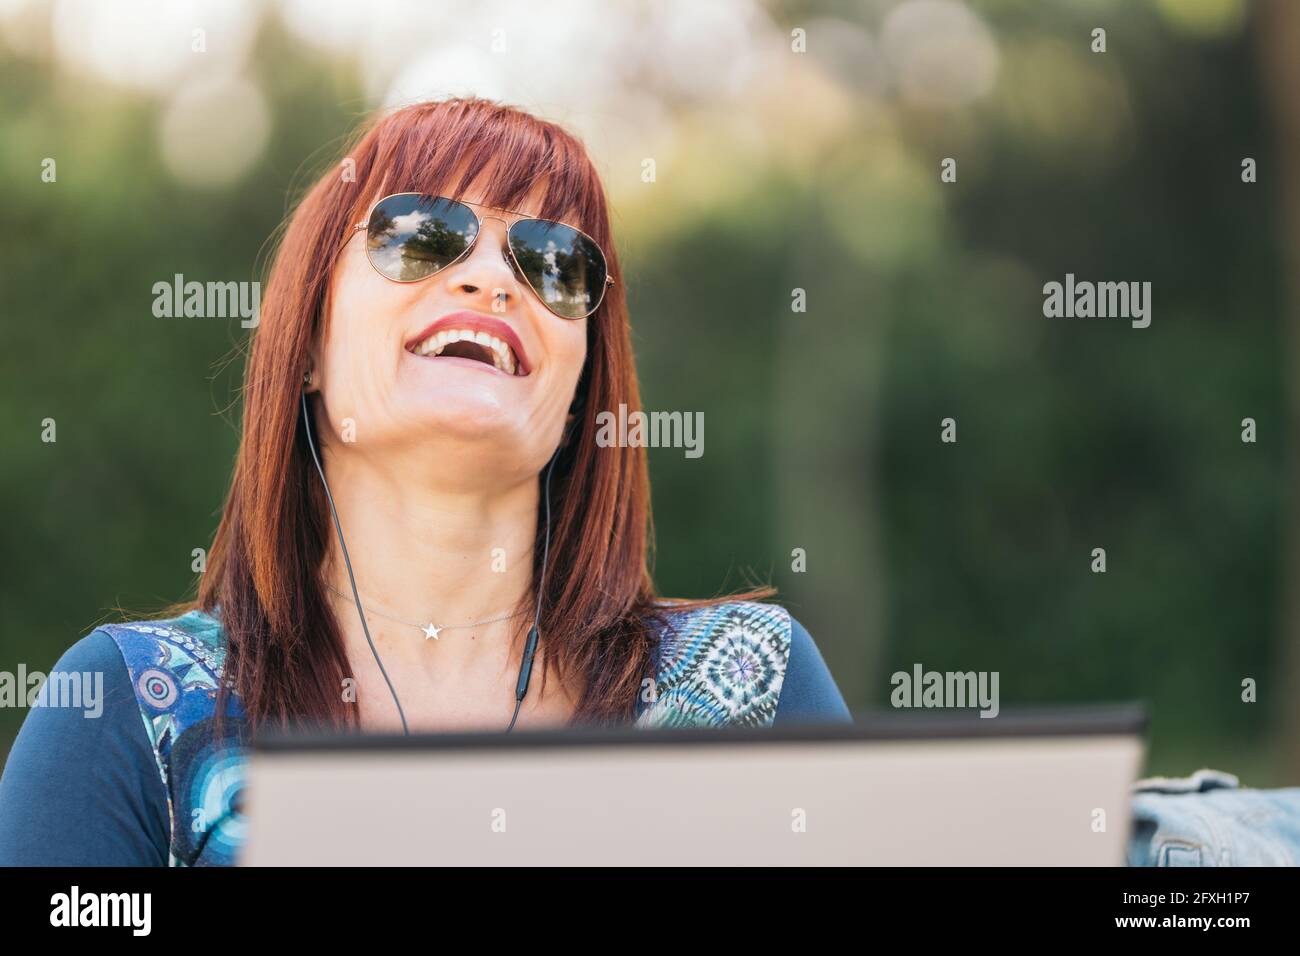 Red-haired woman sitting on a park bench using a laptop and laughing out loud on a sunny day. Medium close up. Stock Photo